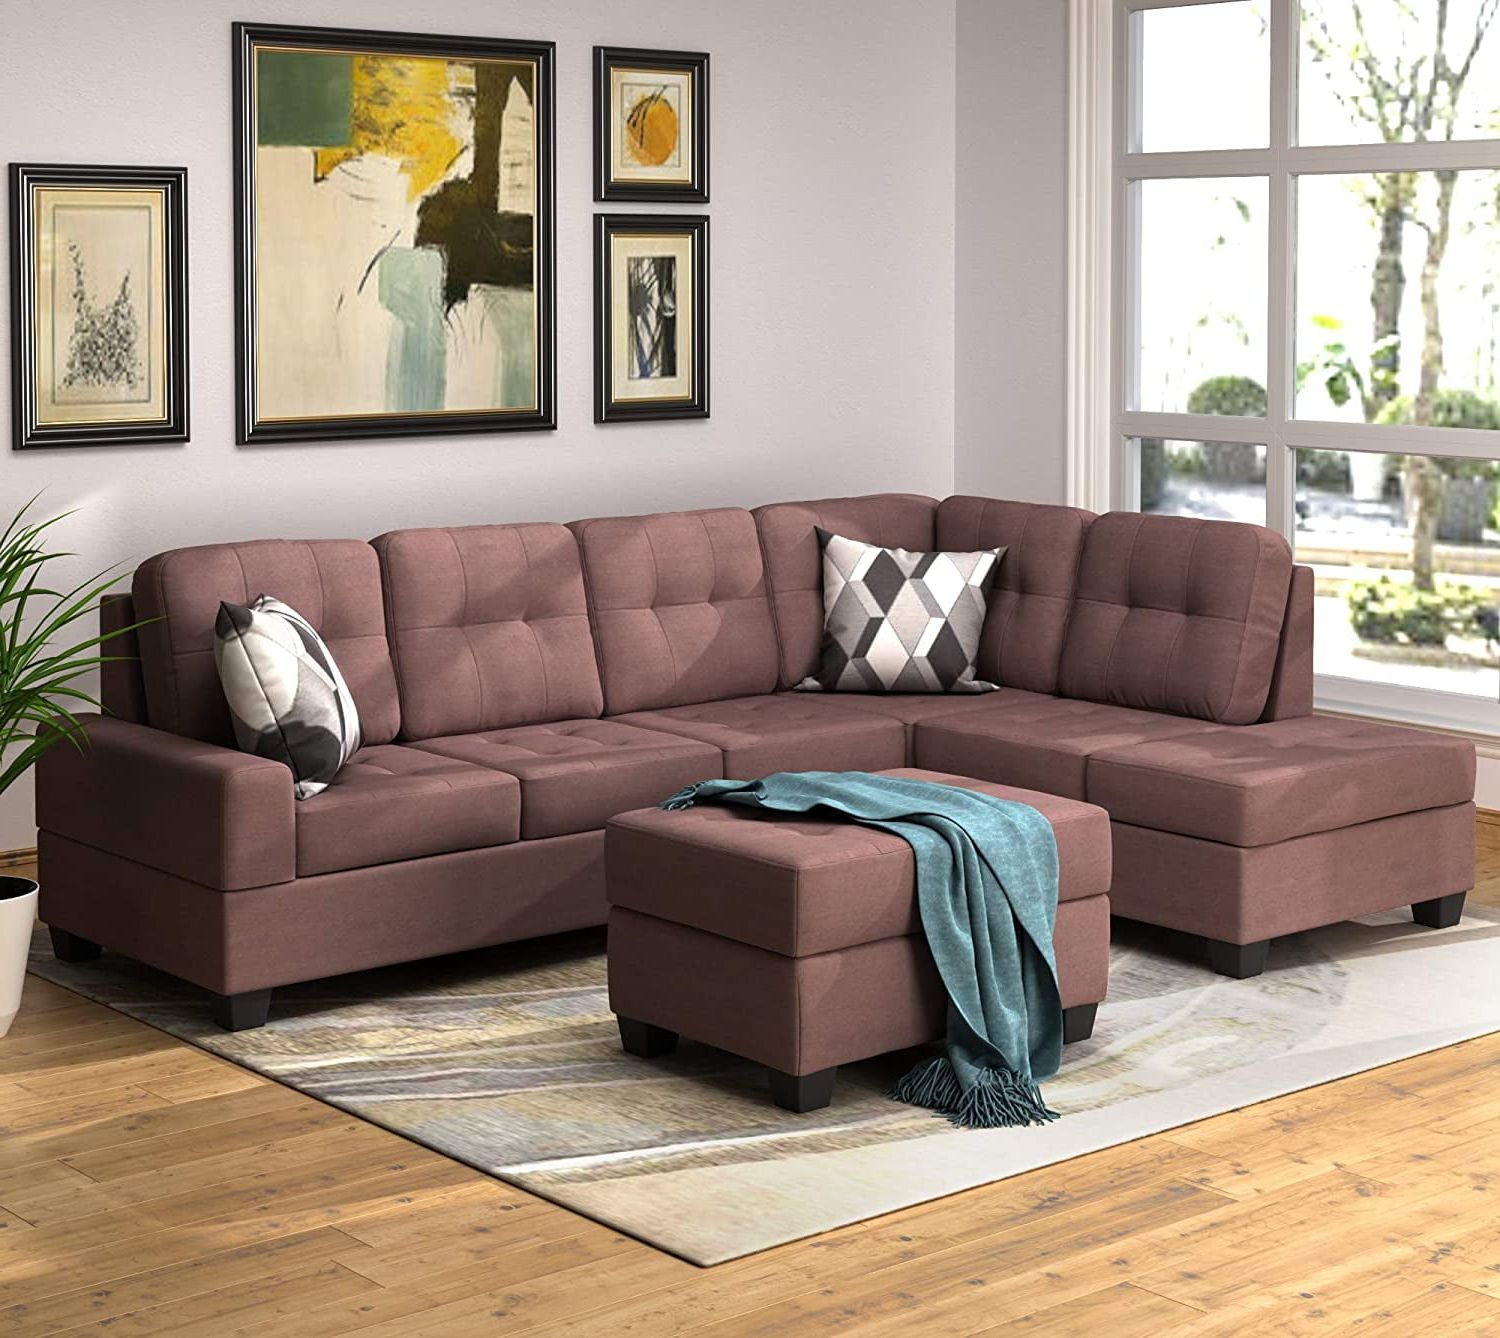 Soges Suede L Shape Sectional Sofa With Reversible Chaise Lounge For For L Shape Couches With Reversible Chaises (View 13 of 20)